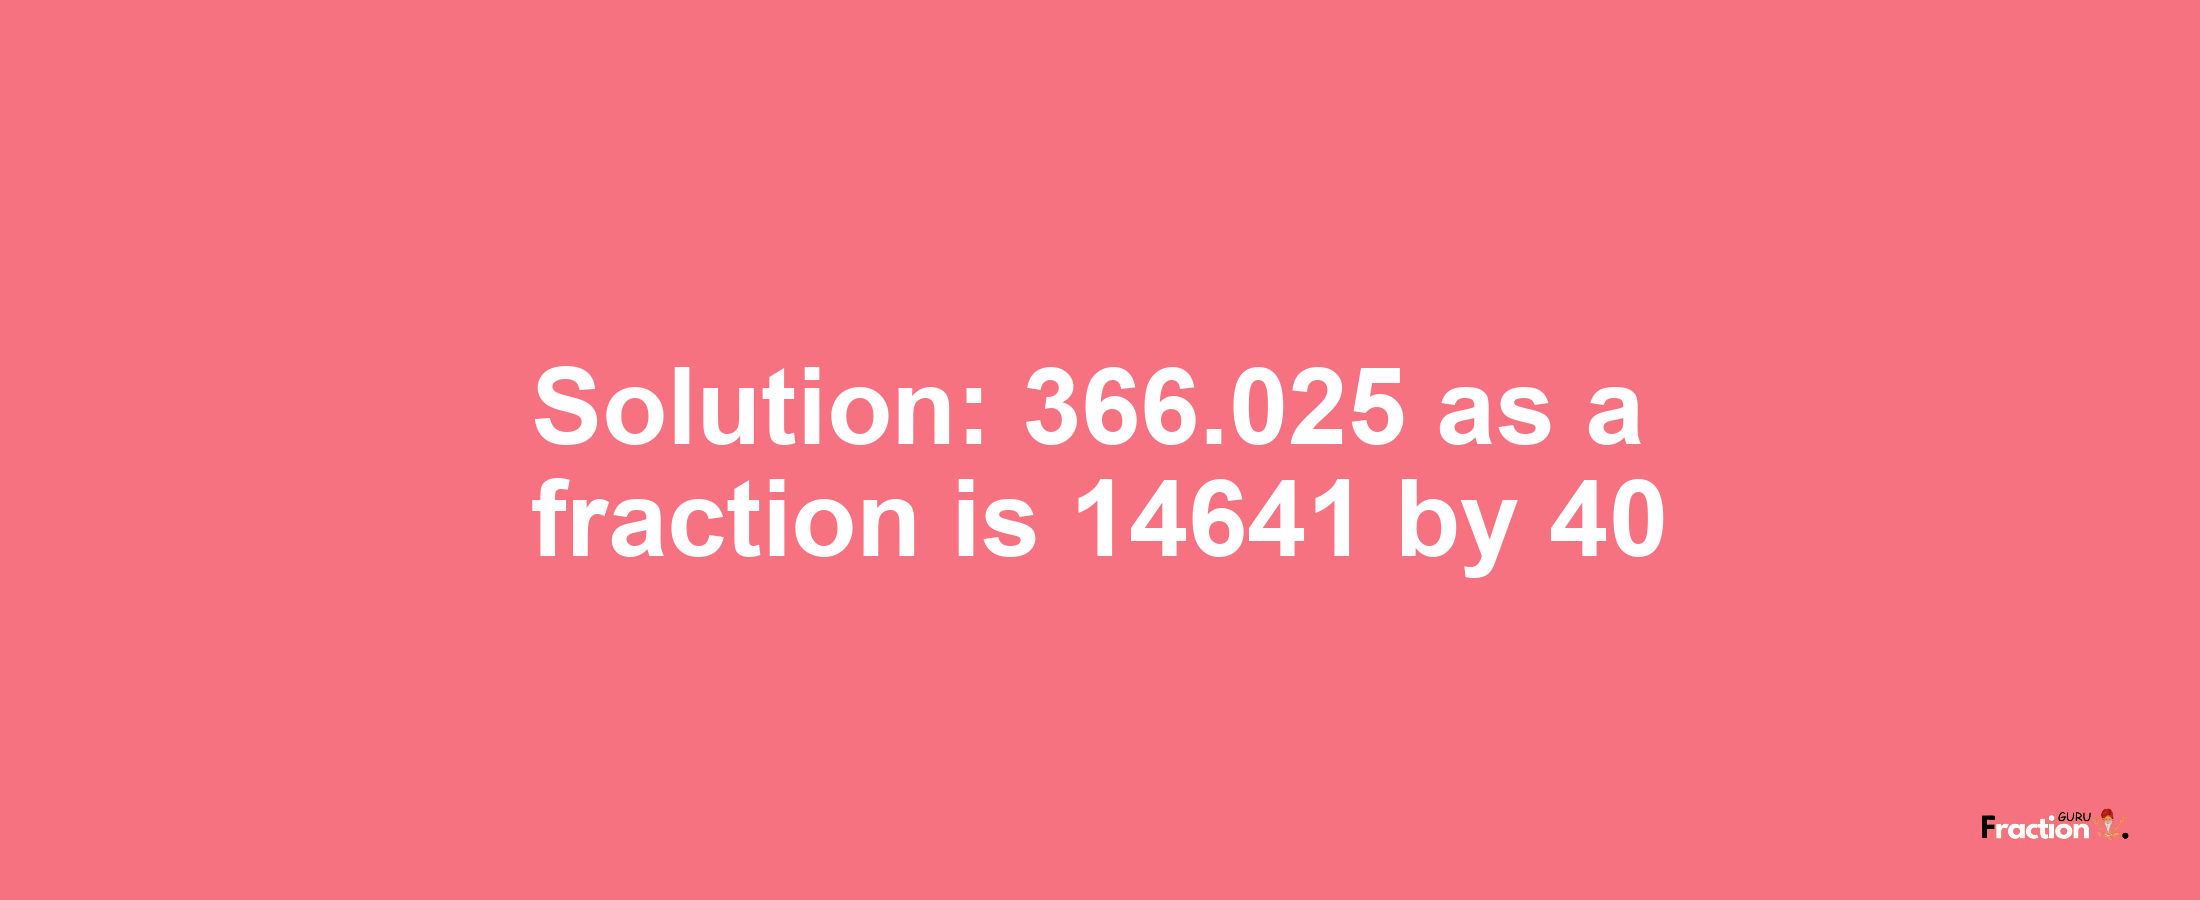 Solution:366.025 as a fraction is 14641/40